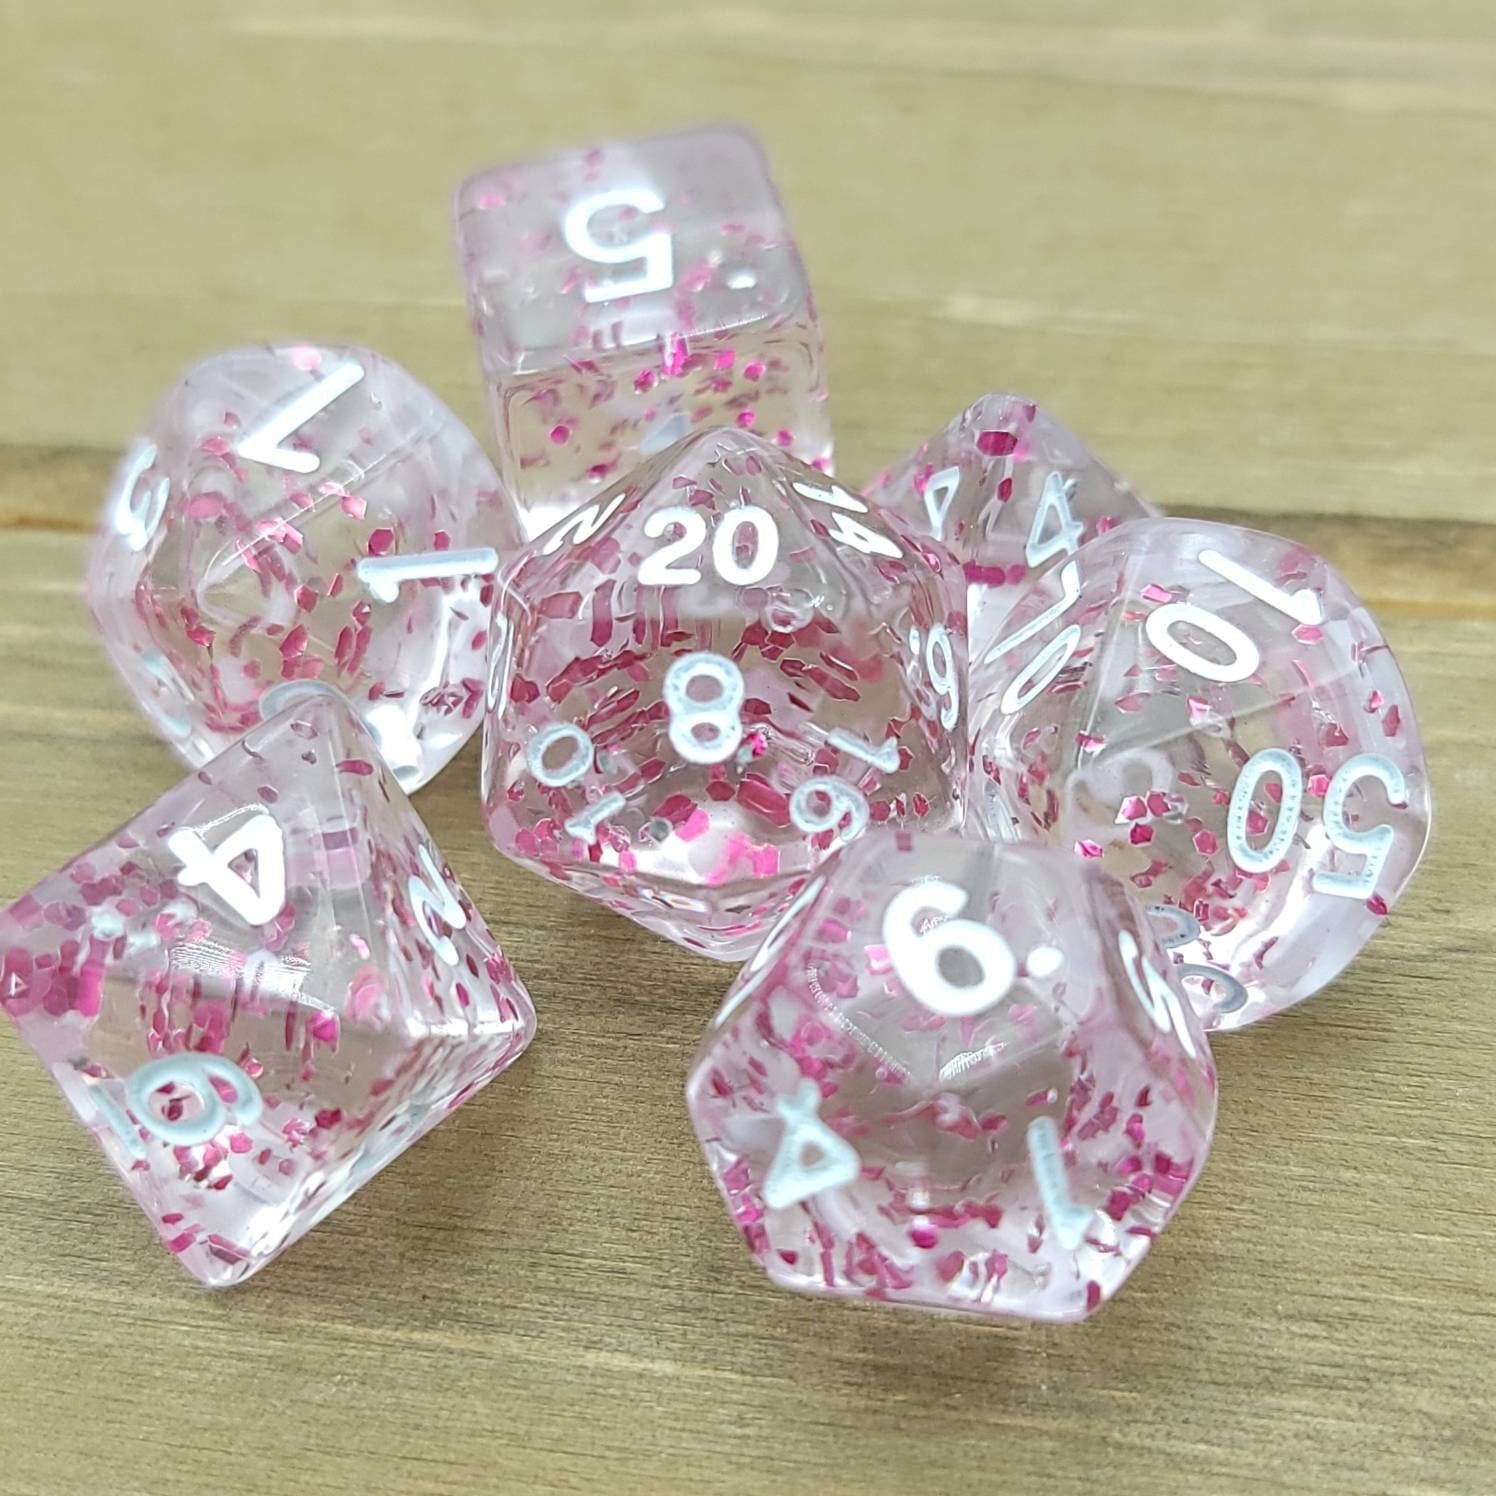 Magenta Confetti | RPG Dice Set| RPG Dice | Polyhedral Dice Set | Dungeons and Dragons | DnD Dice Set | Gaming Dice Set